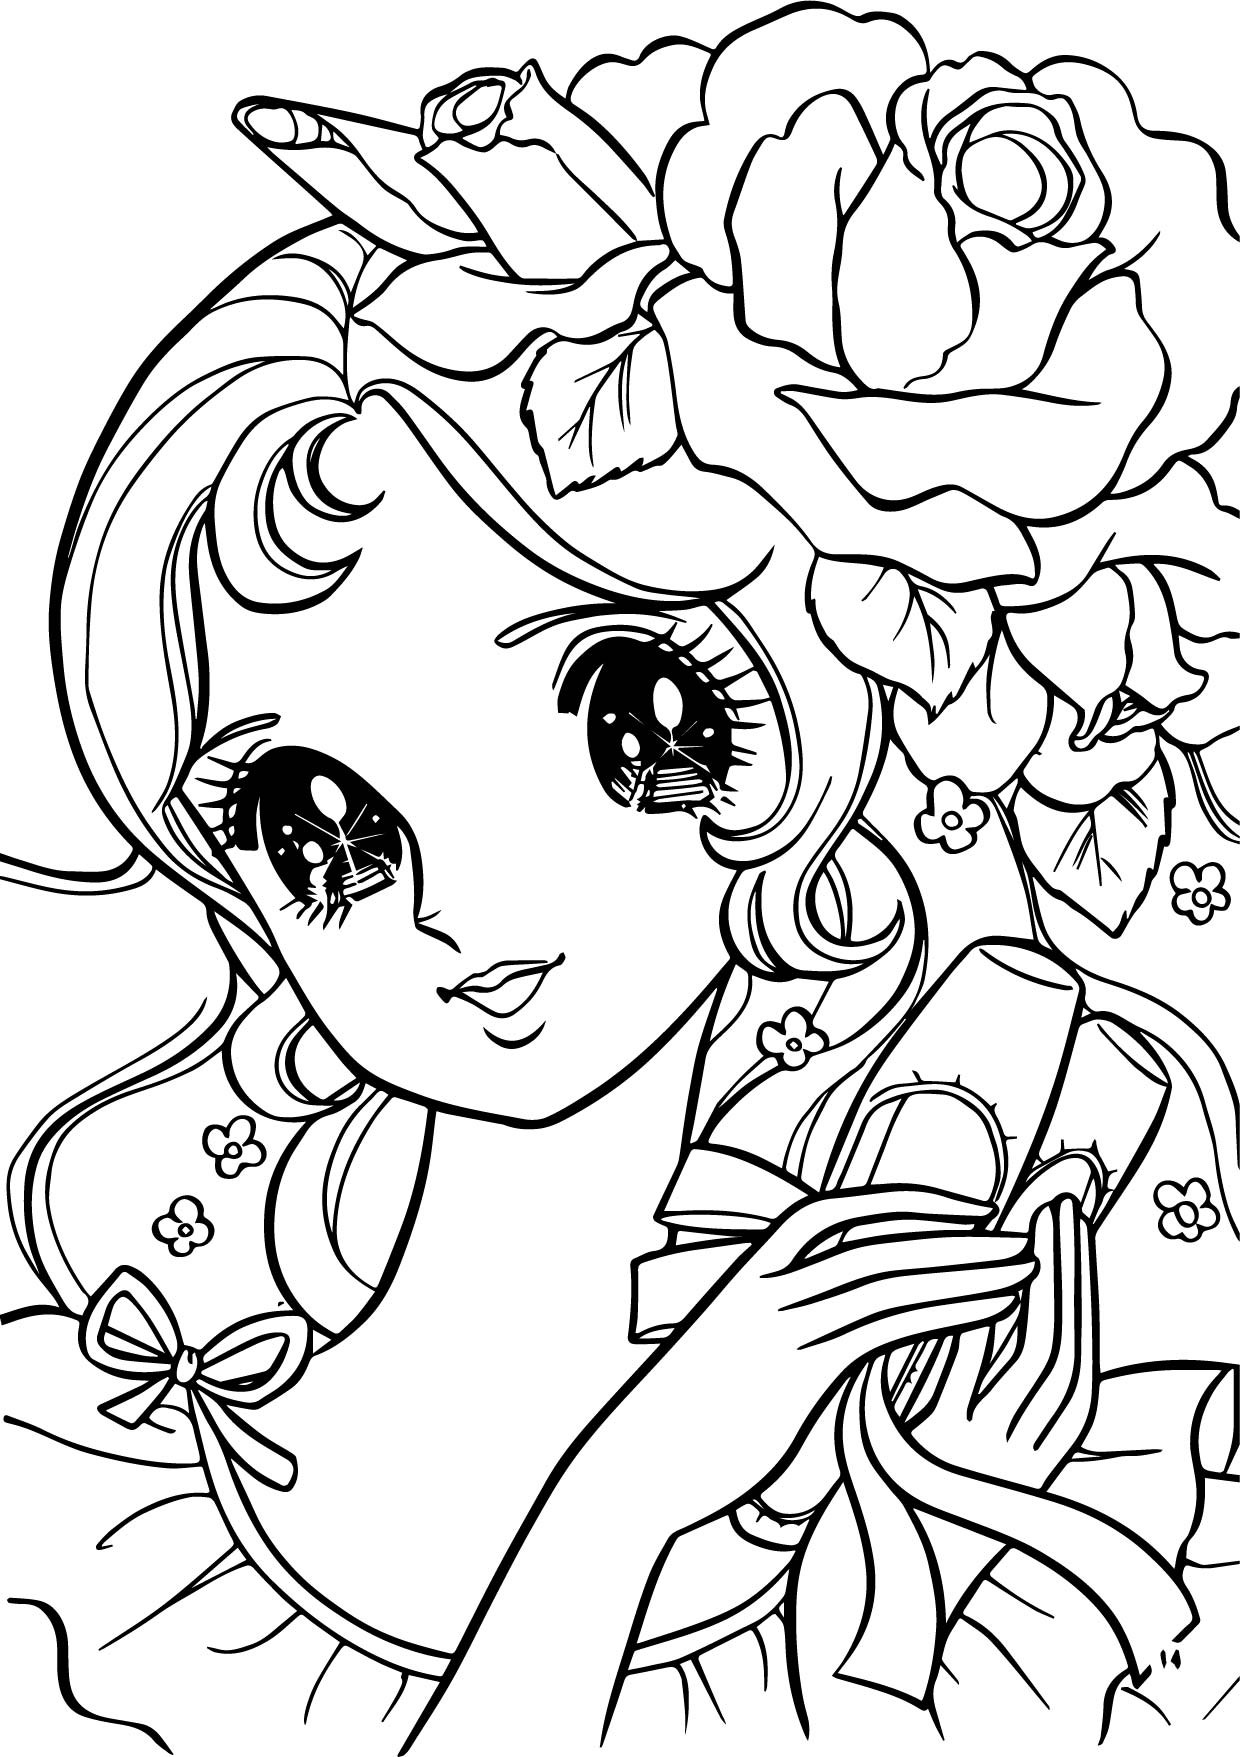 Coloring Sheets Of Girls
 Aeromachia Girl Flower Hair Coloring Pages